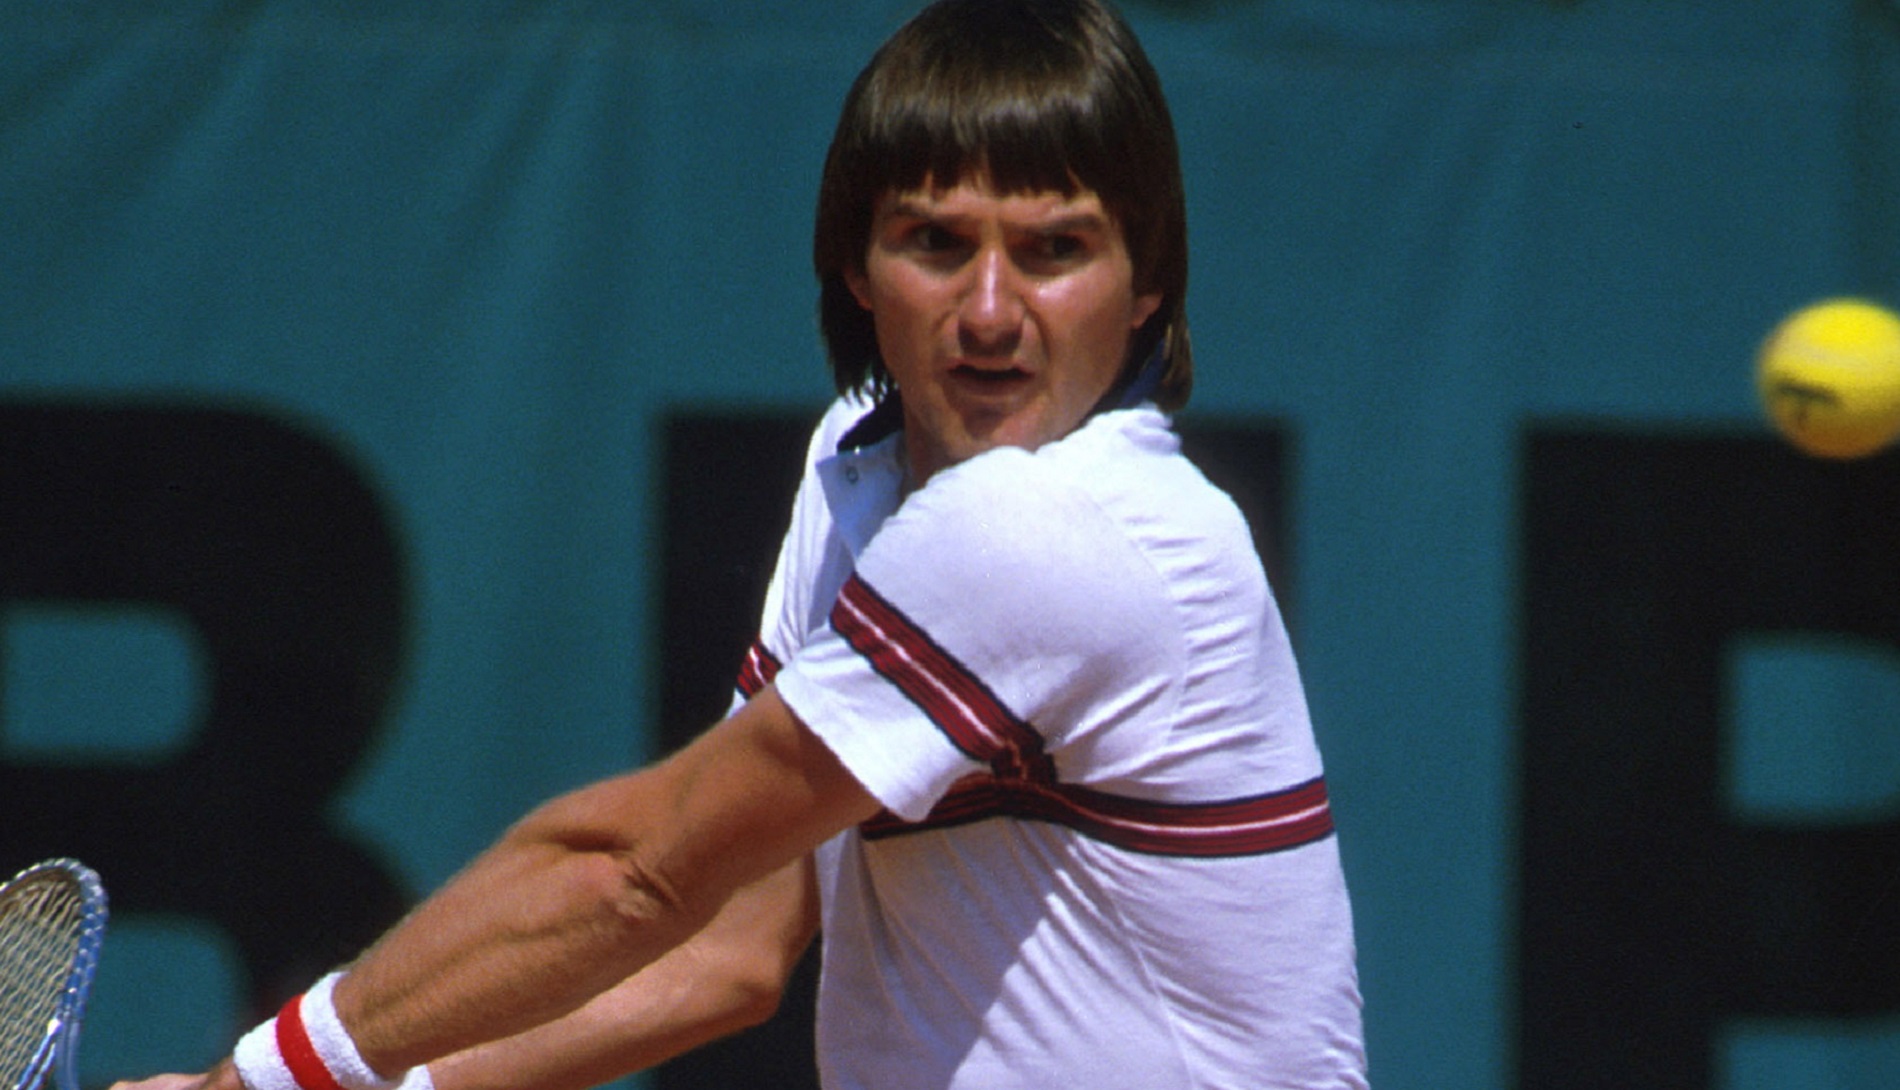 Tennis: Jimmy Connors with 115 appearances, top the list of Men's Singles Players with Most Matches At US Open in Open Era